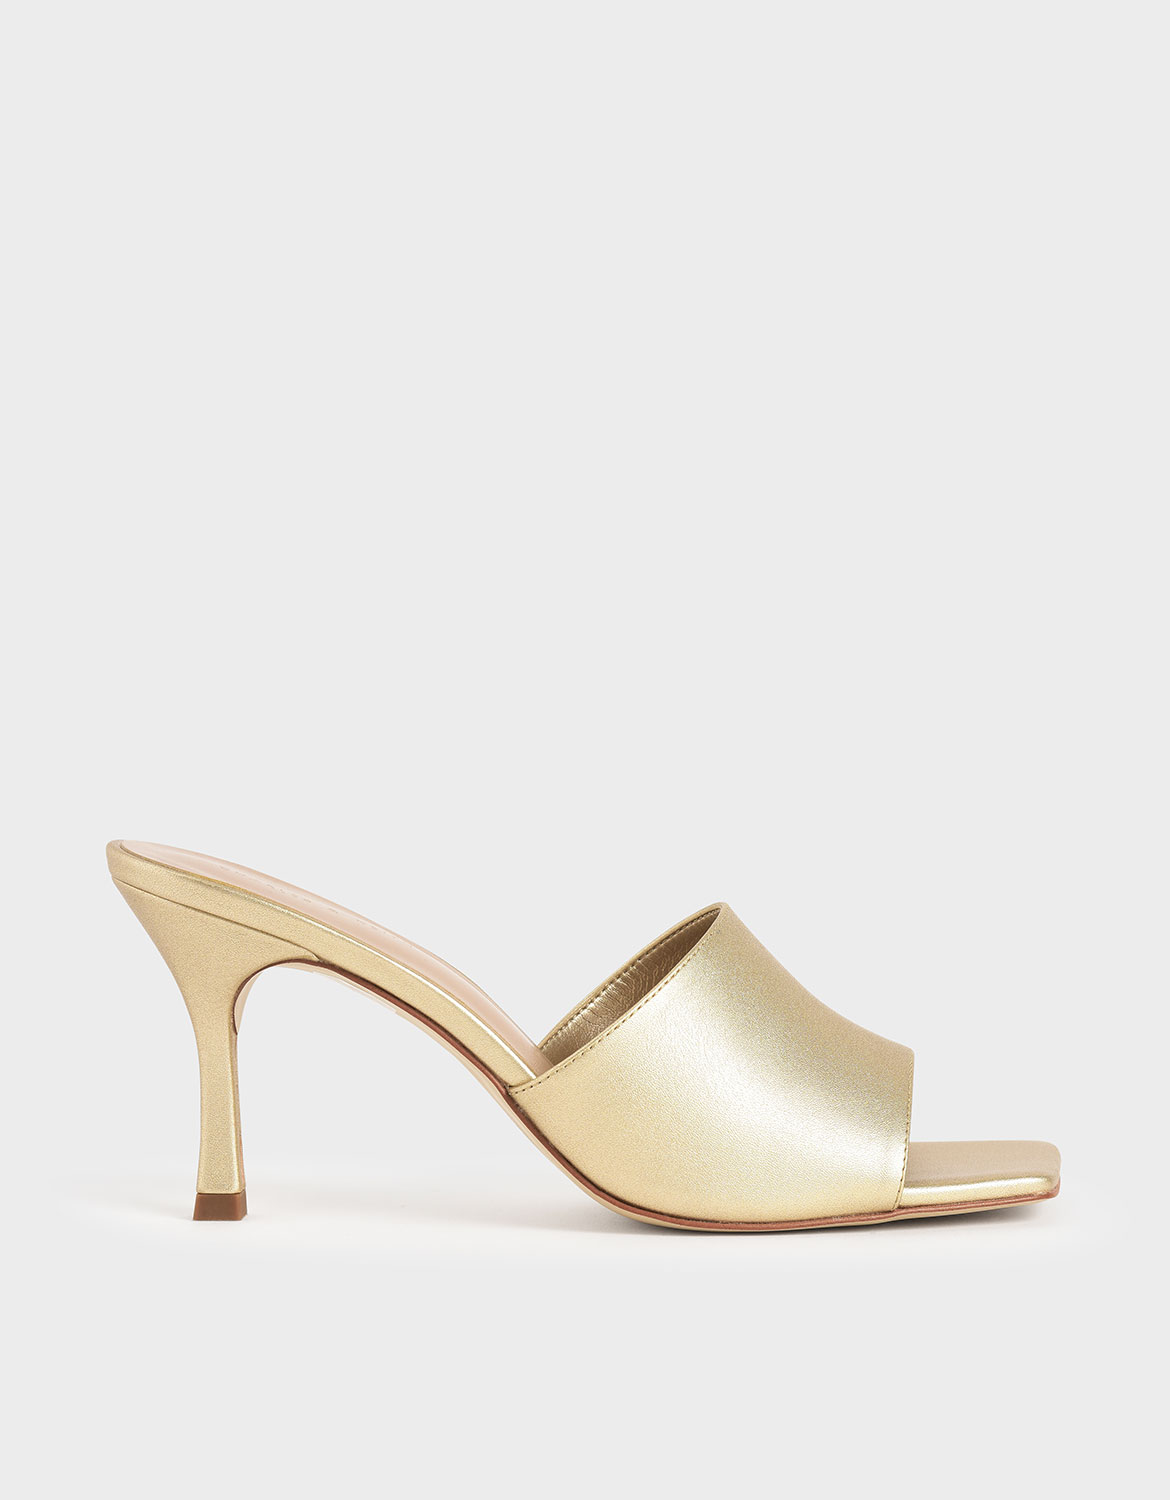 Gold Metallic Square Toe Mules - CHARLES & KEITH ID